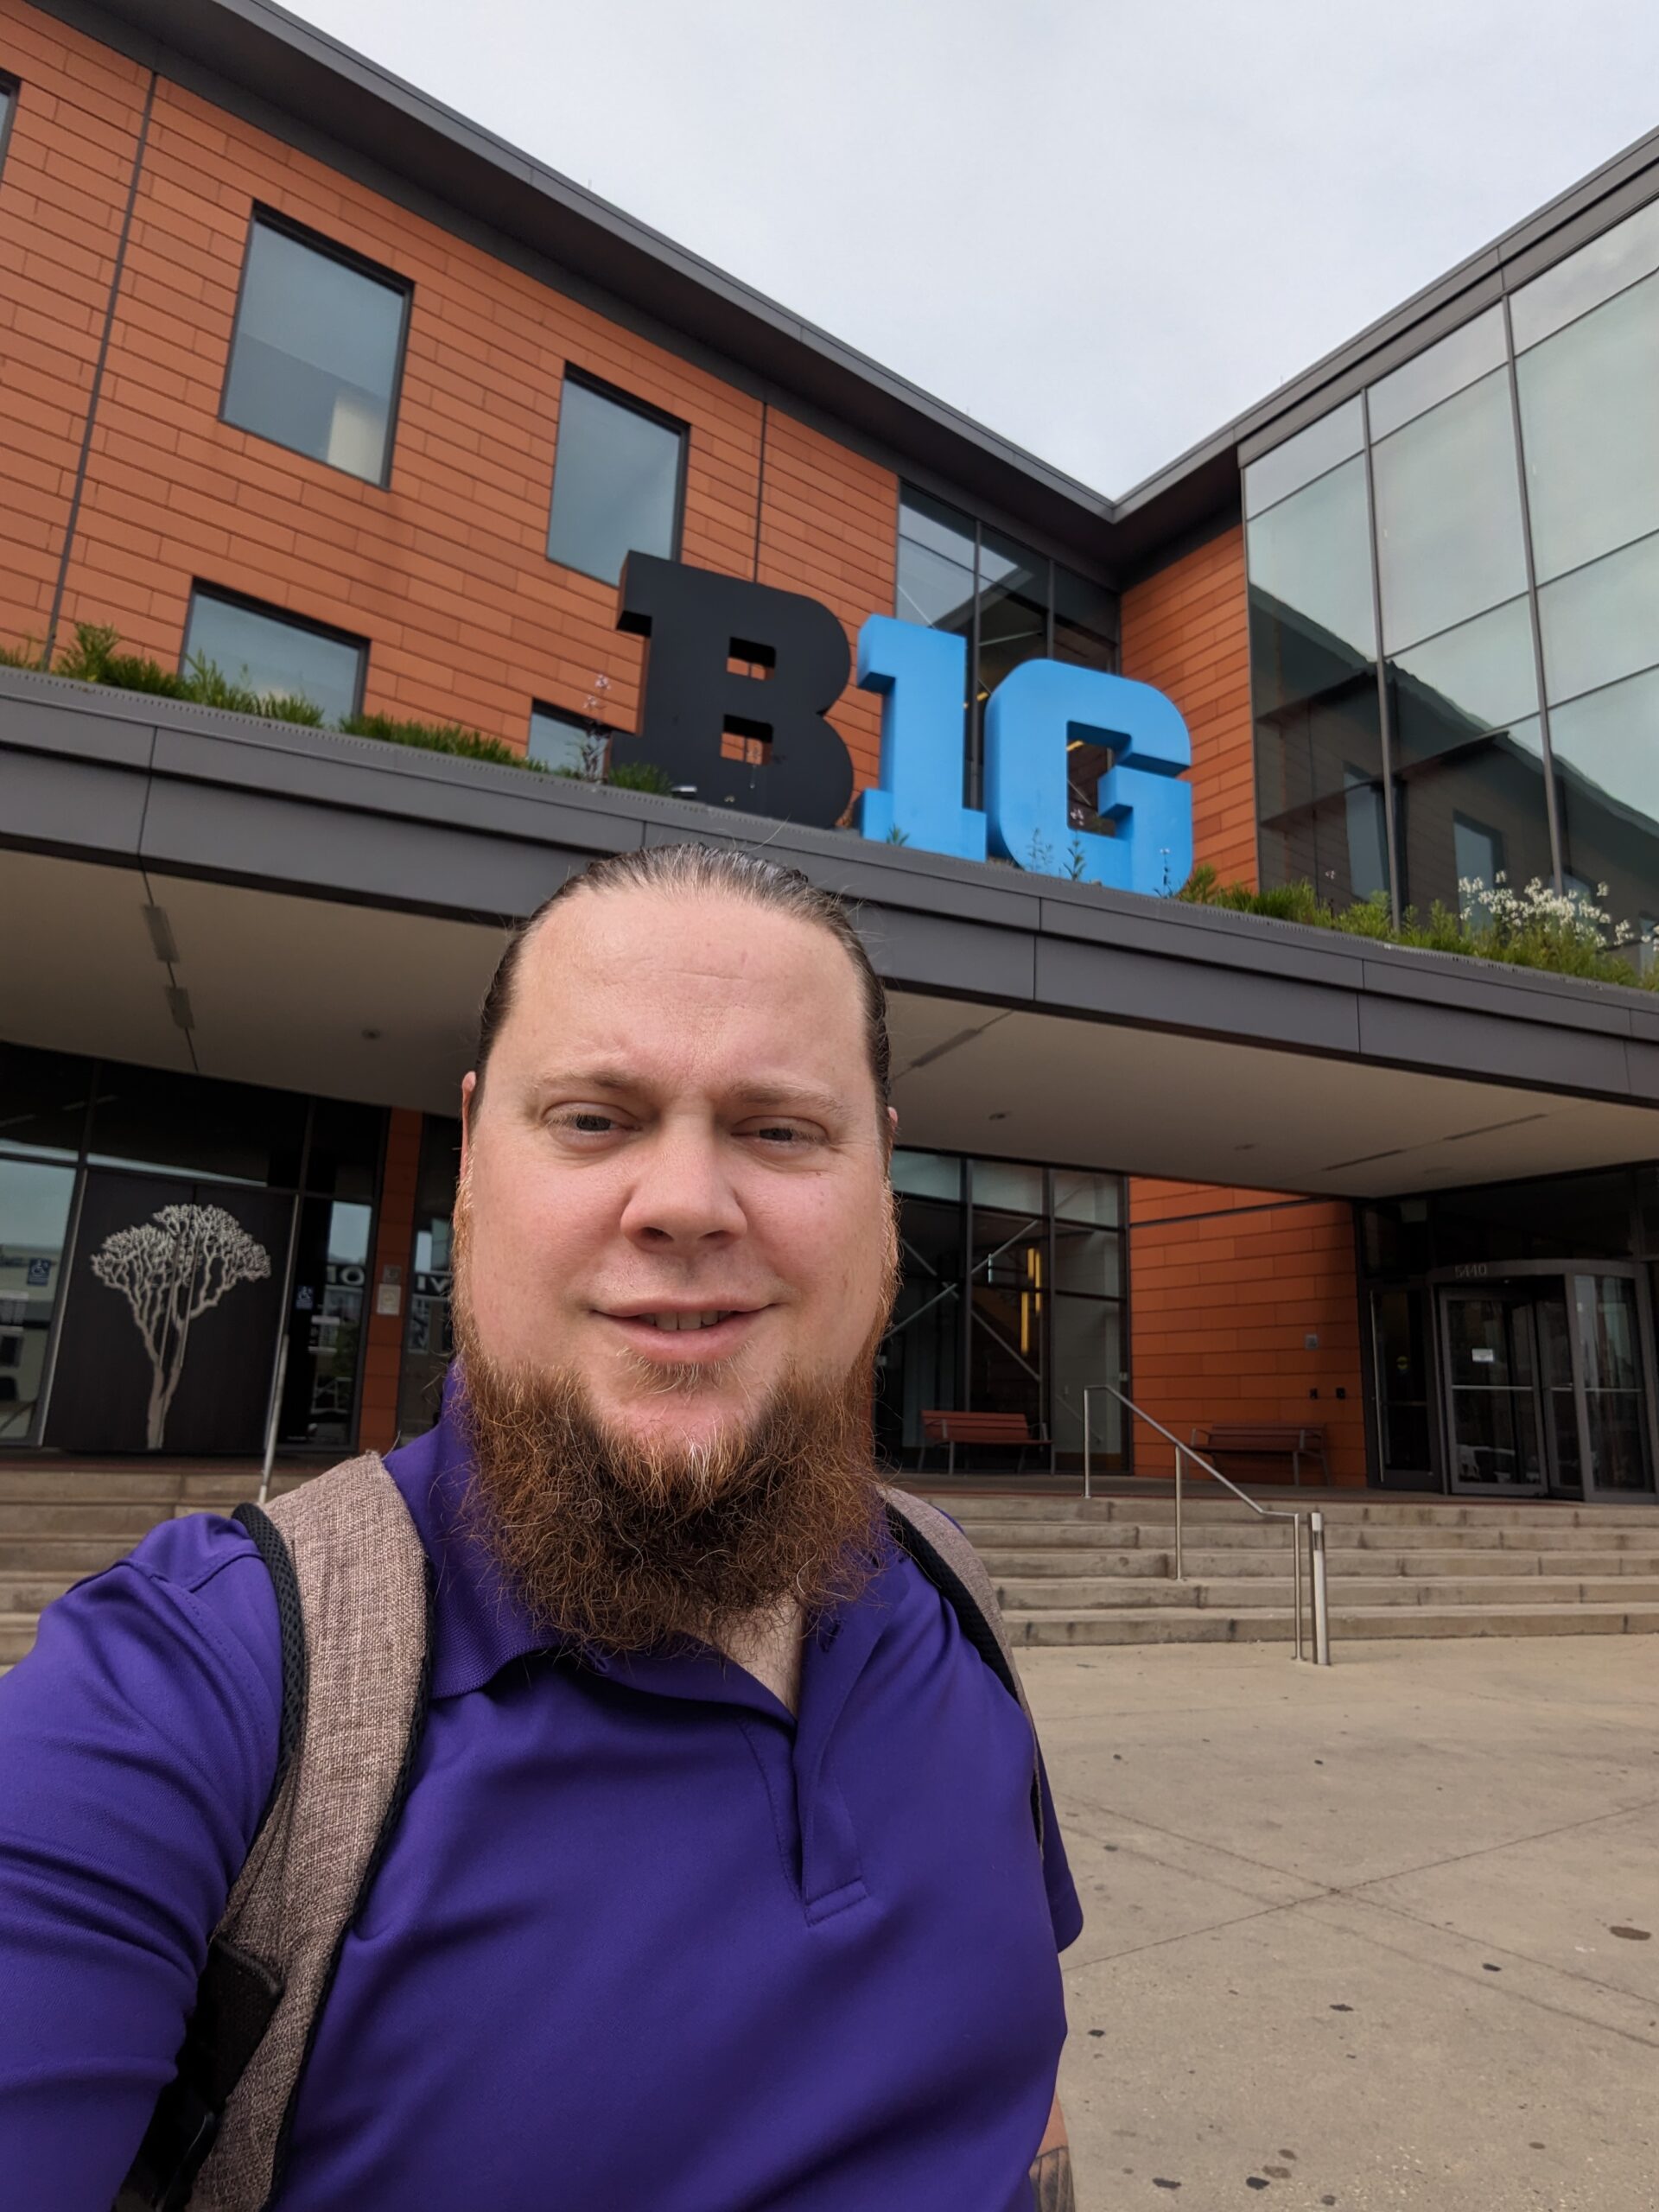 Evan Bradley standing in front of the Big Ten conference center in Rosemont, IL. He is wearing a purple shirt and standing in front of a building displaying the B1G logo.